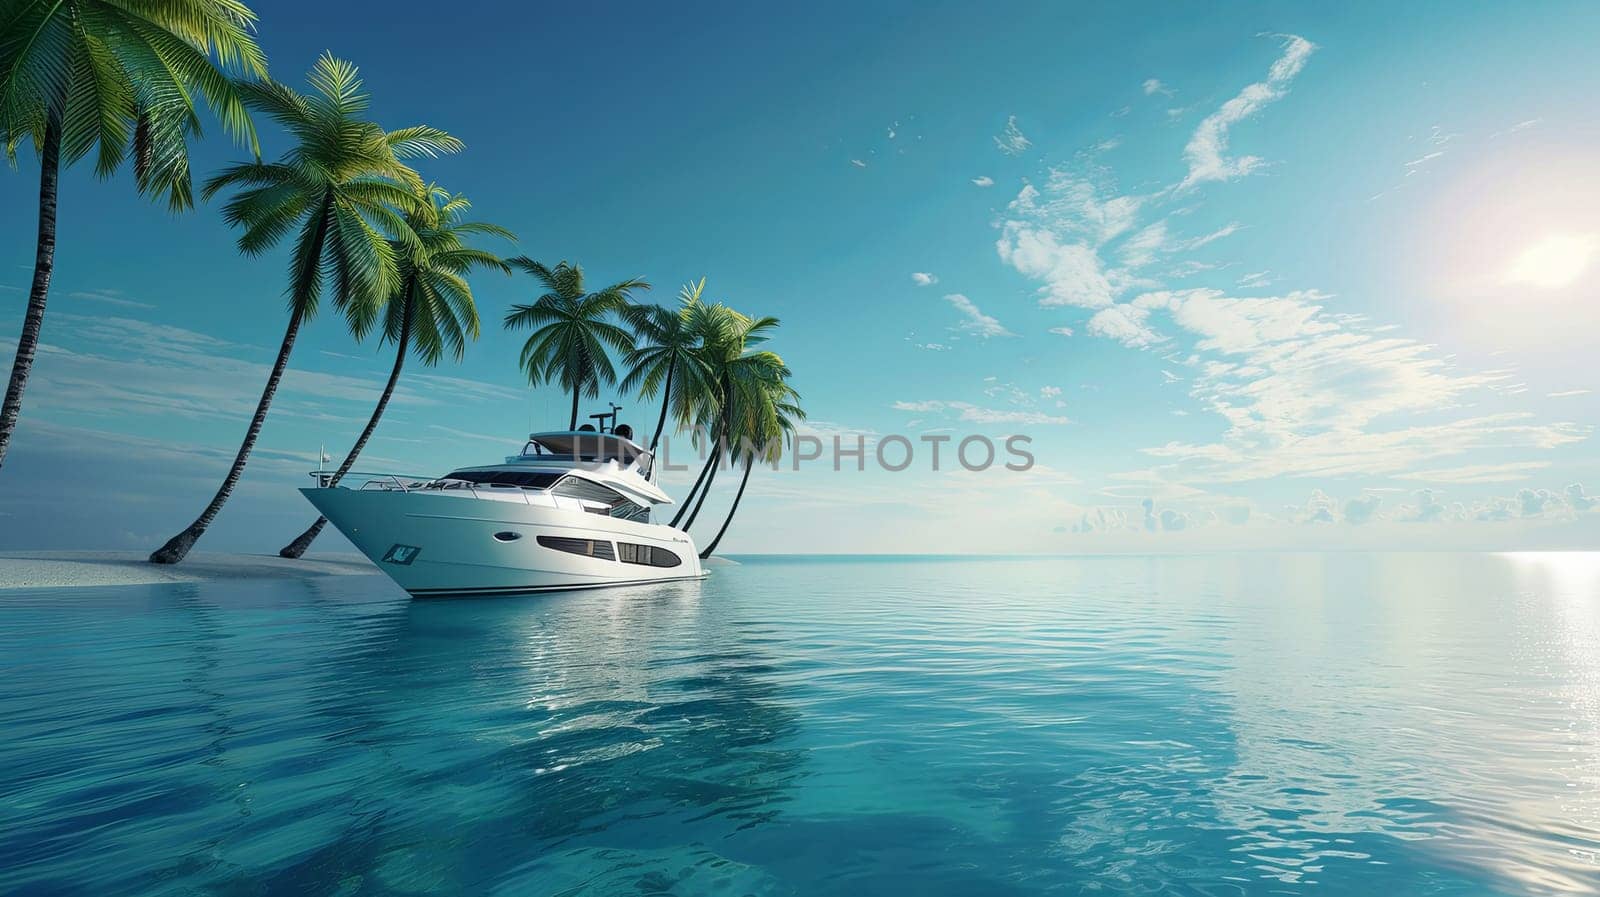 A serene scene unfolds as a white boat peacefully sails through the vast ocean, surrounded by lush palm trees under the clear sky.